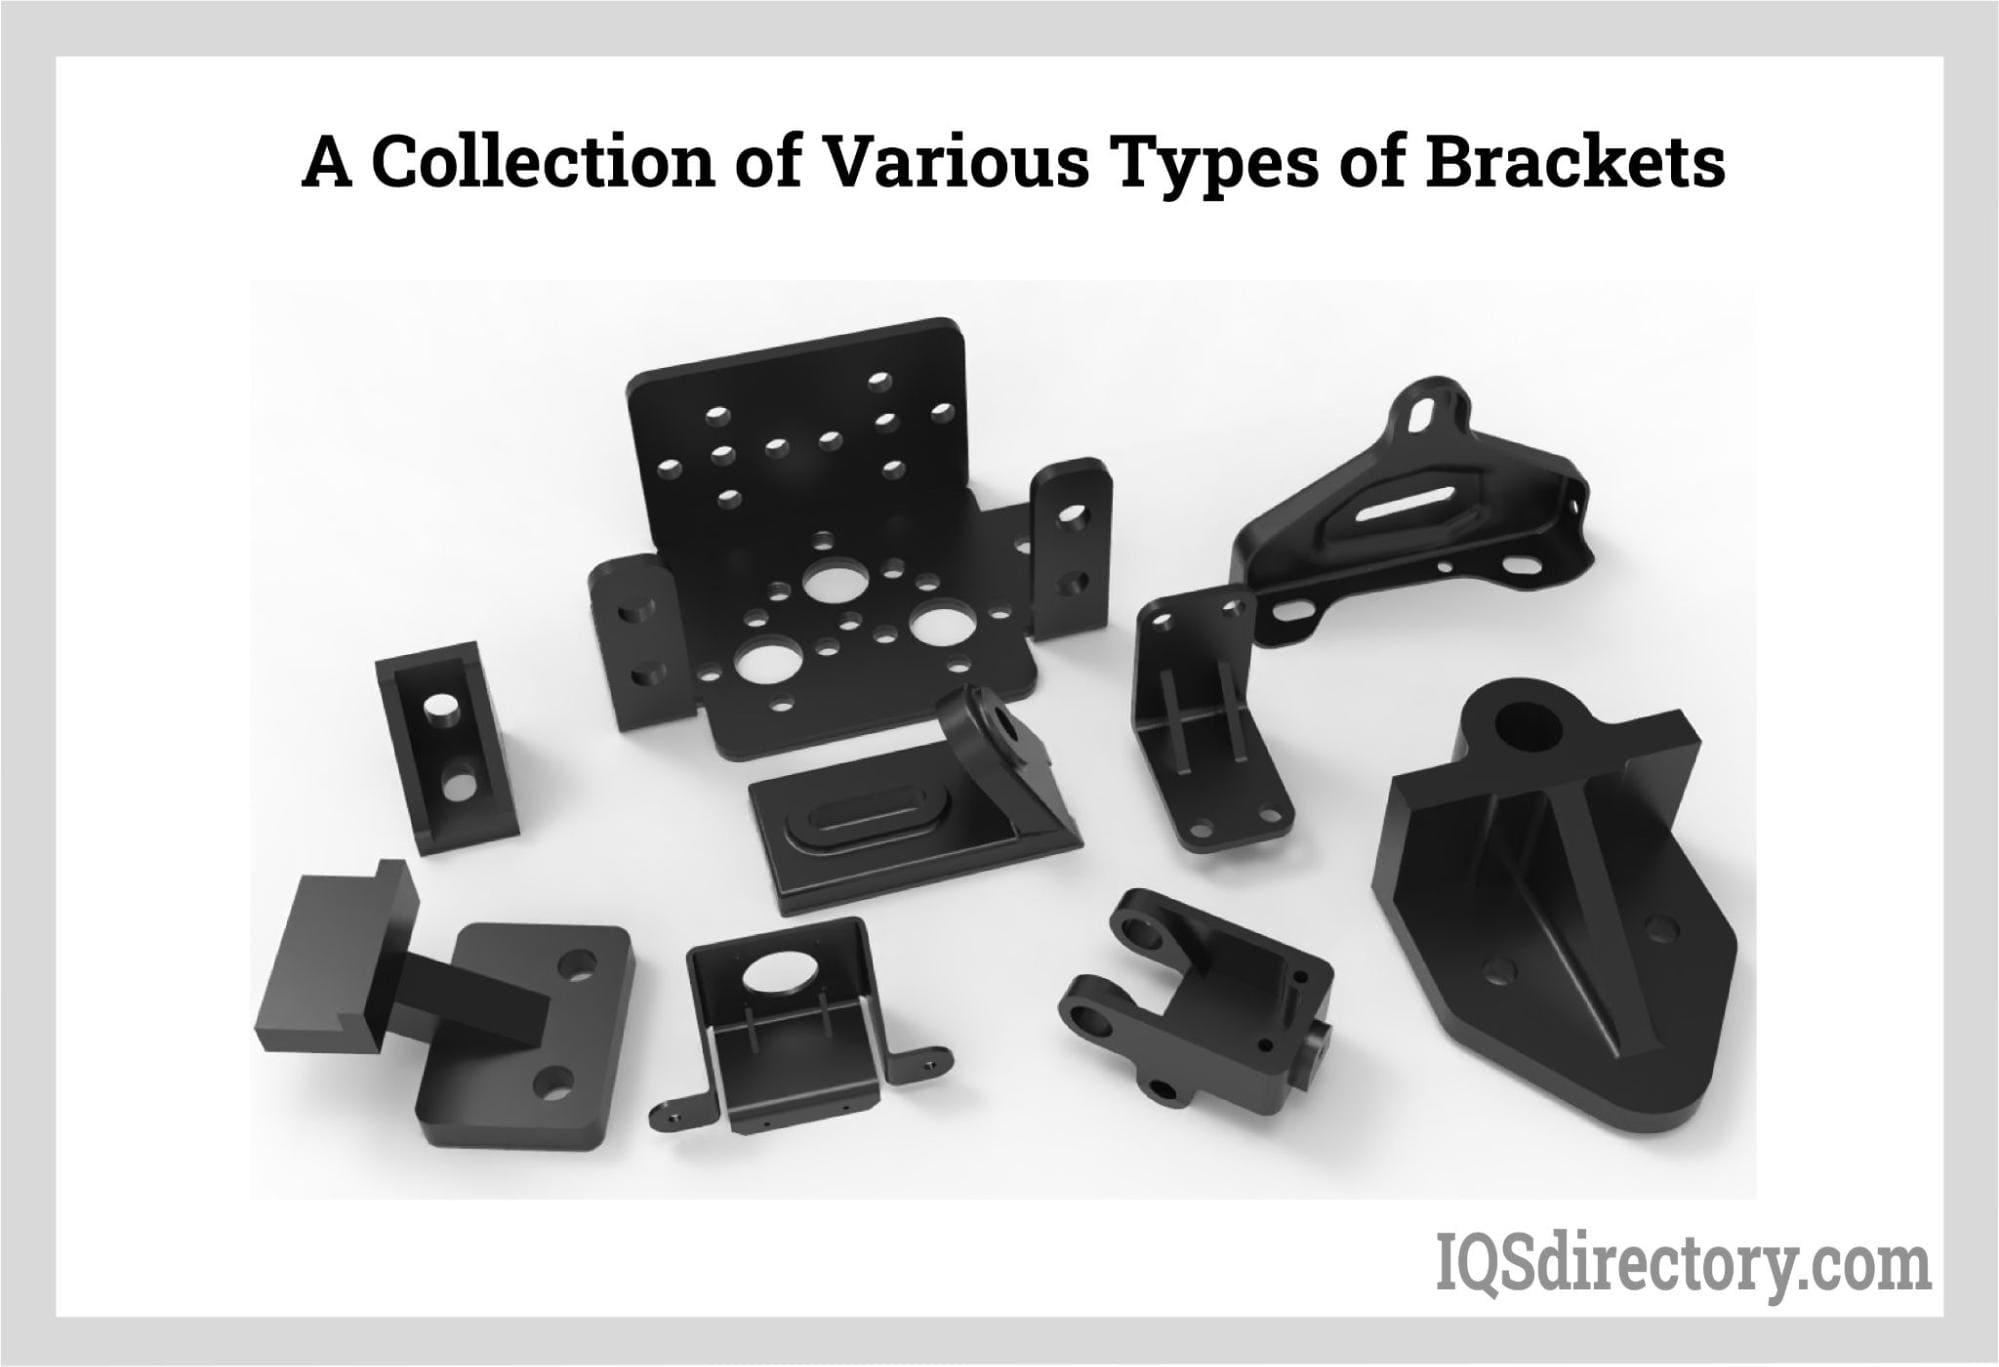 Metal Brackets: Types, Applications, and Advantages